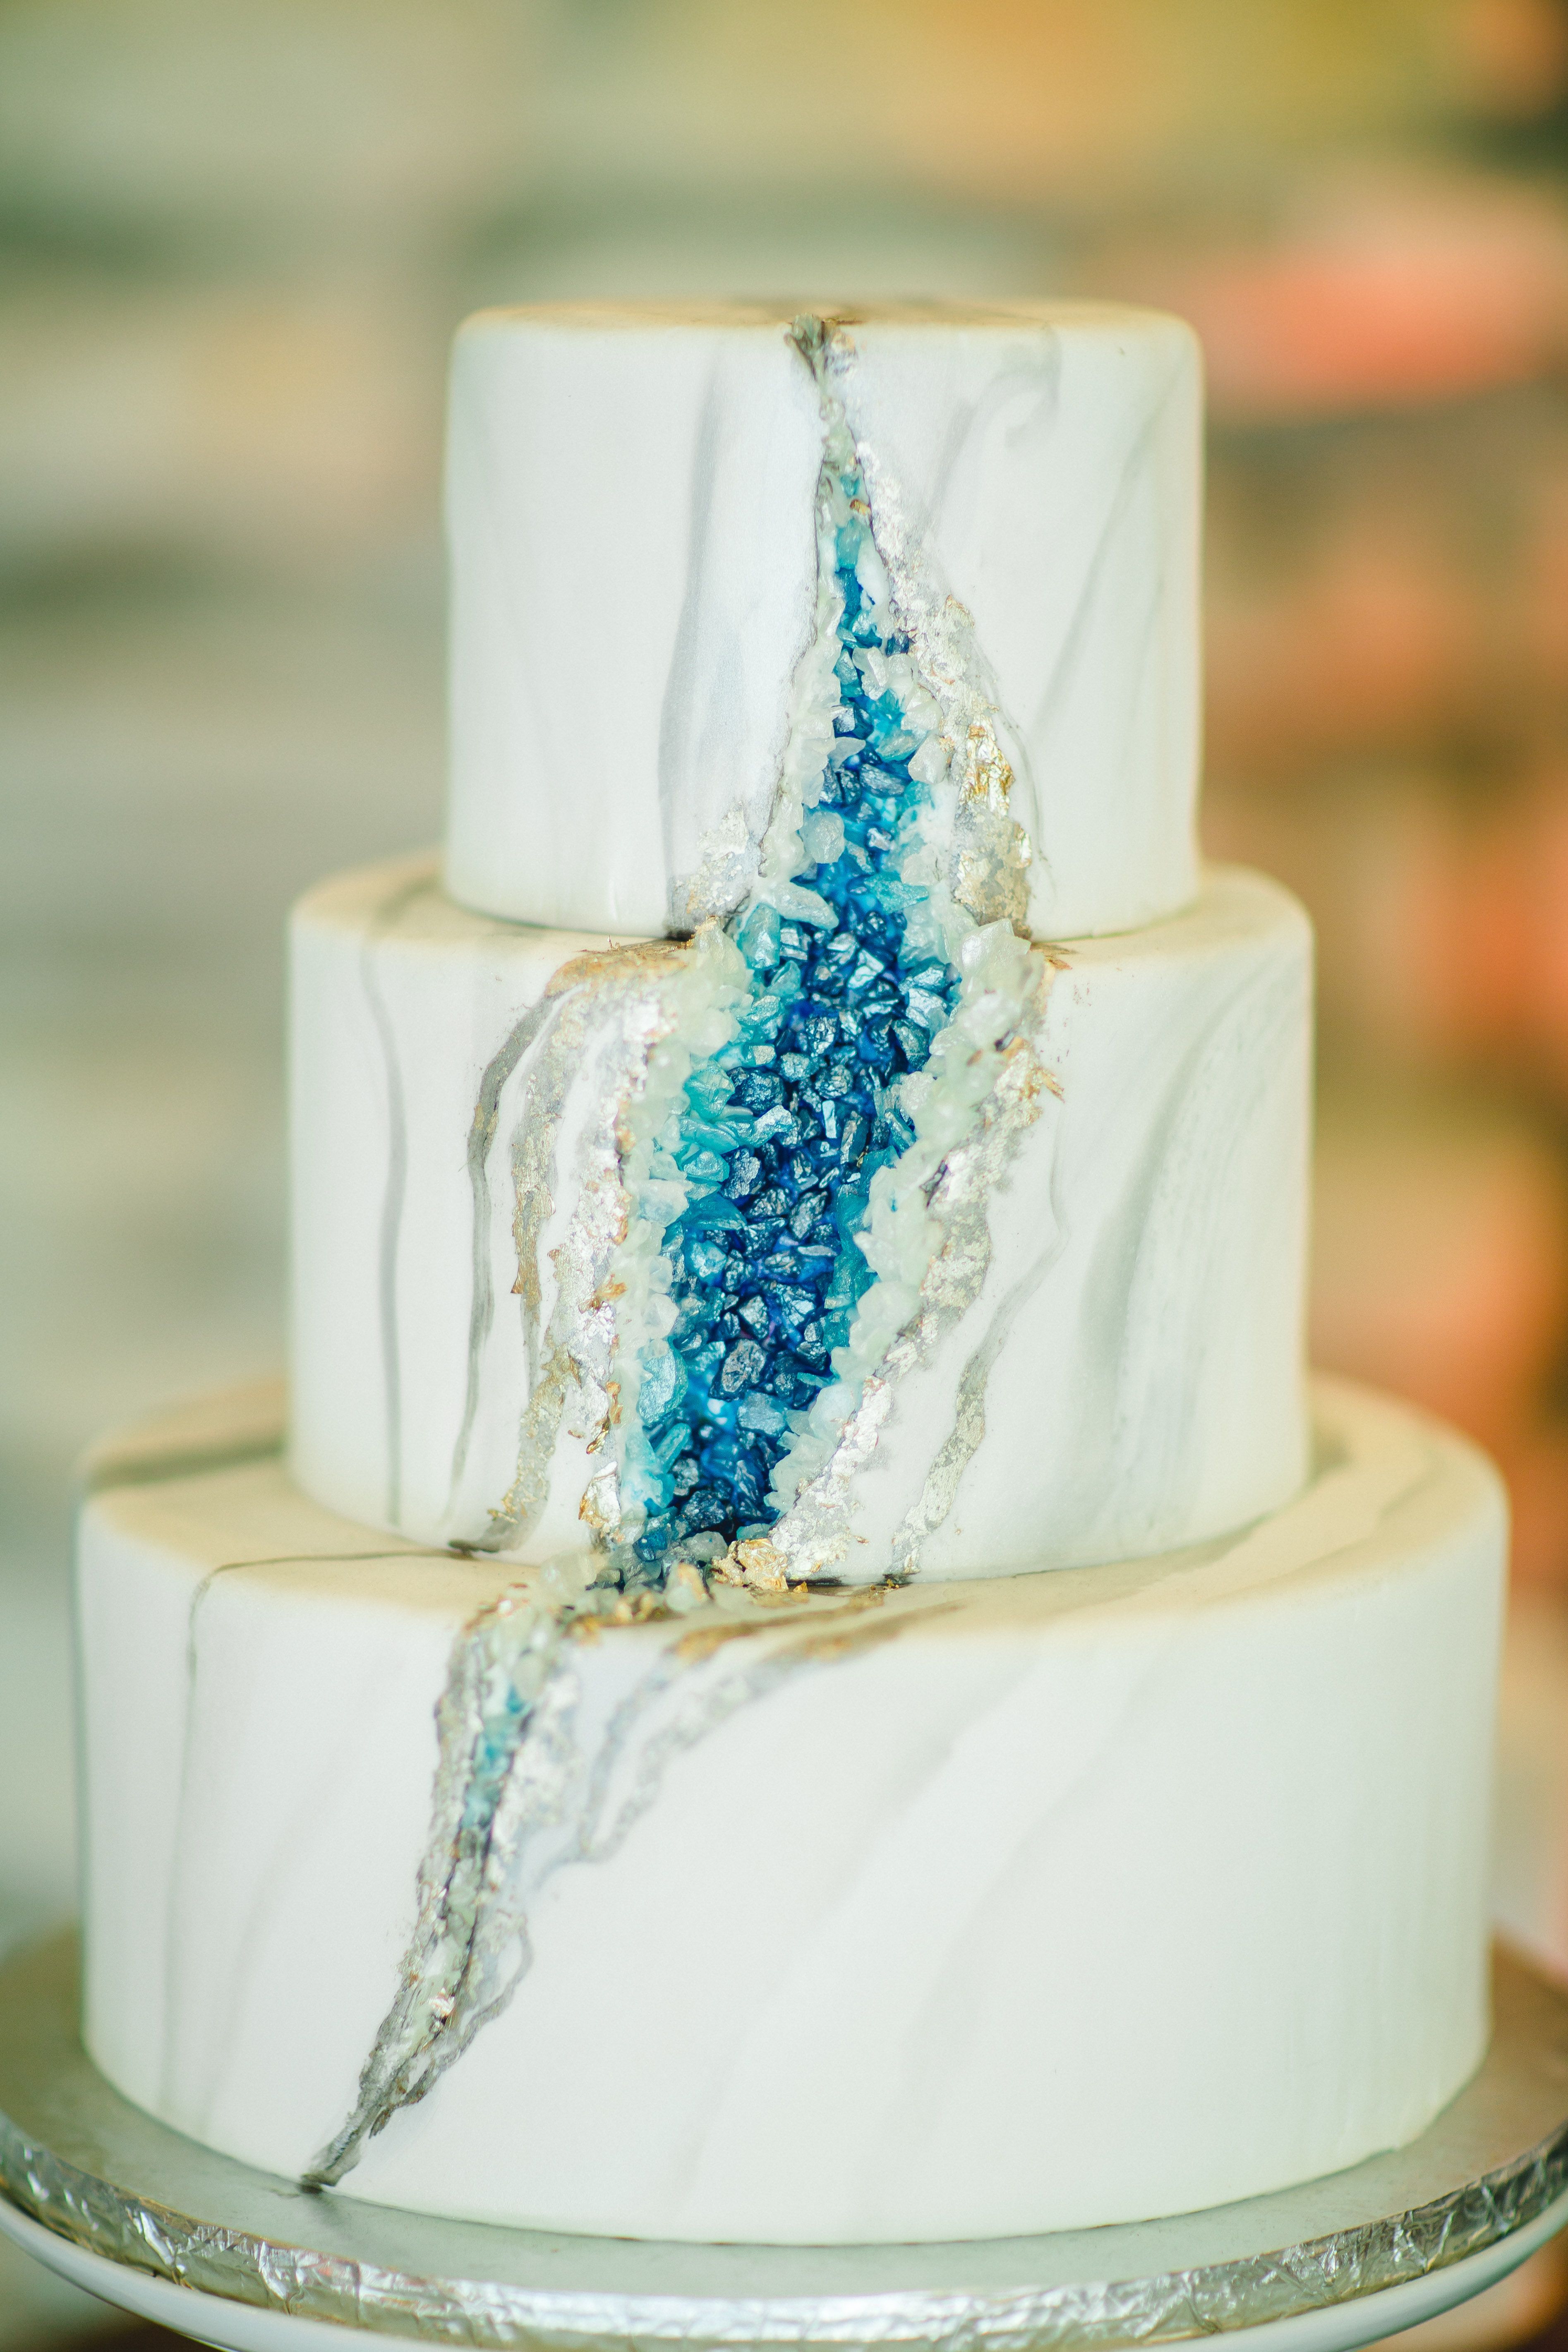 A wedding cake with a geode pattern